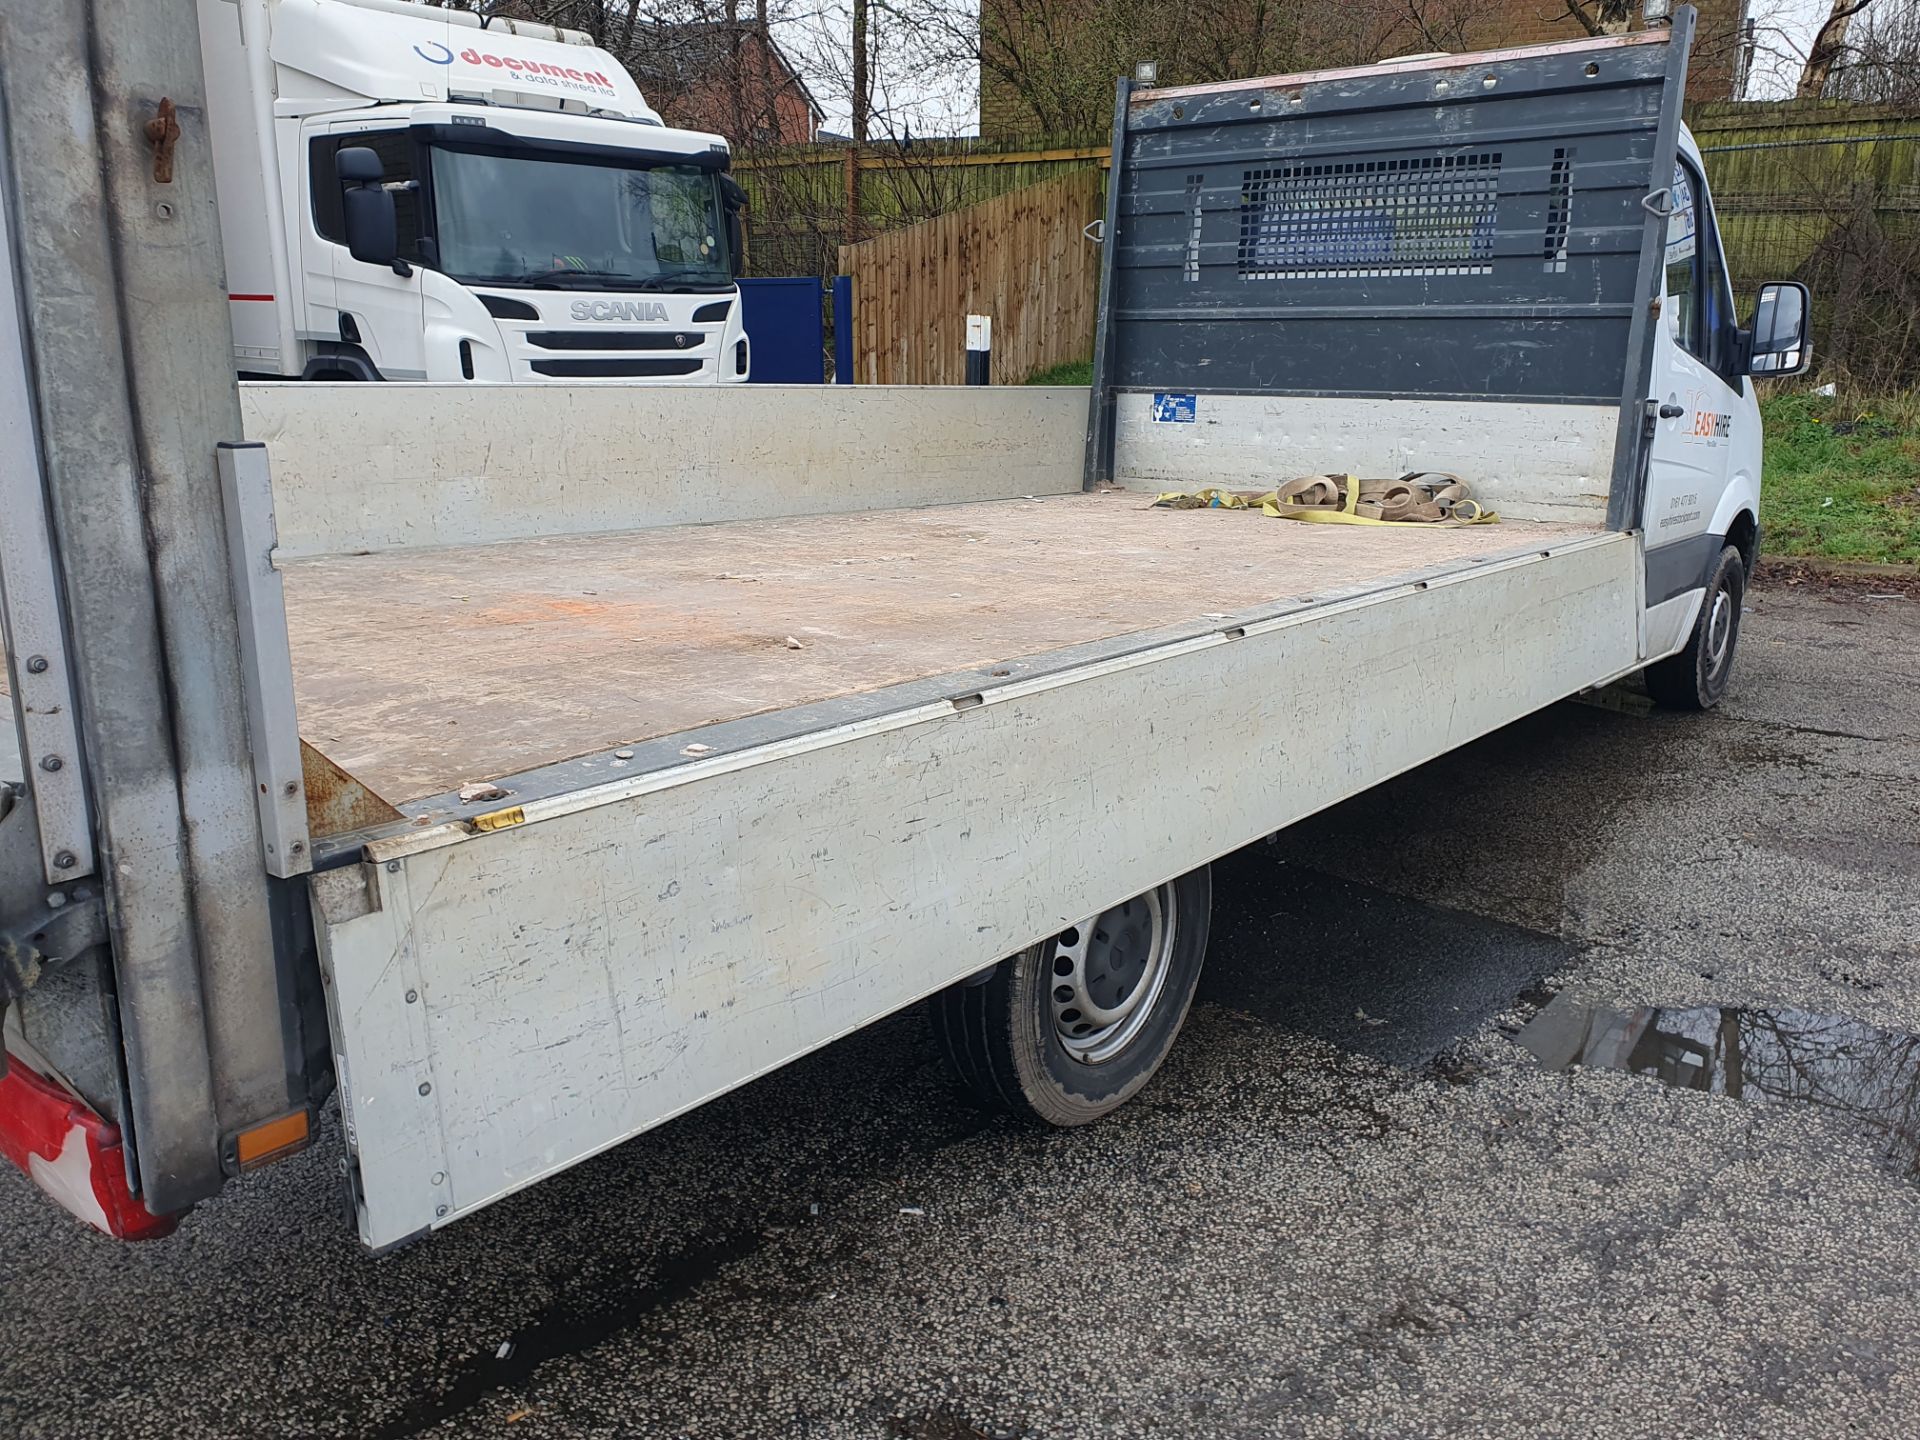 Mercedes-Benz Sprinter 314CDI Dropside Lorry w/ Tail-Lift | DIG 4985 | 102,887 Miles - Image 9 of 19